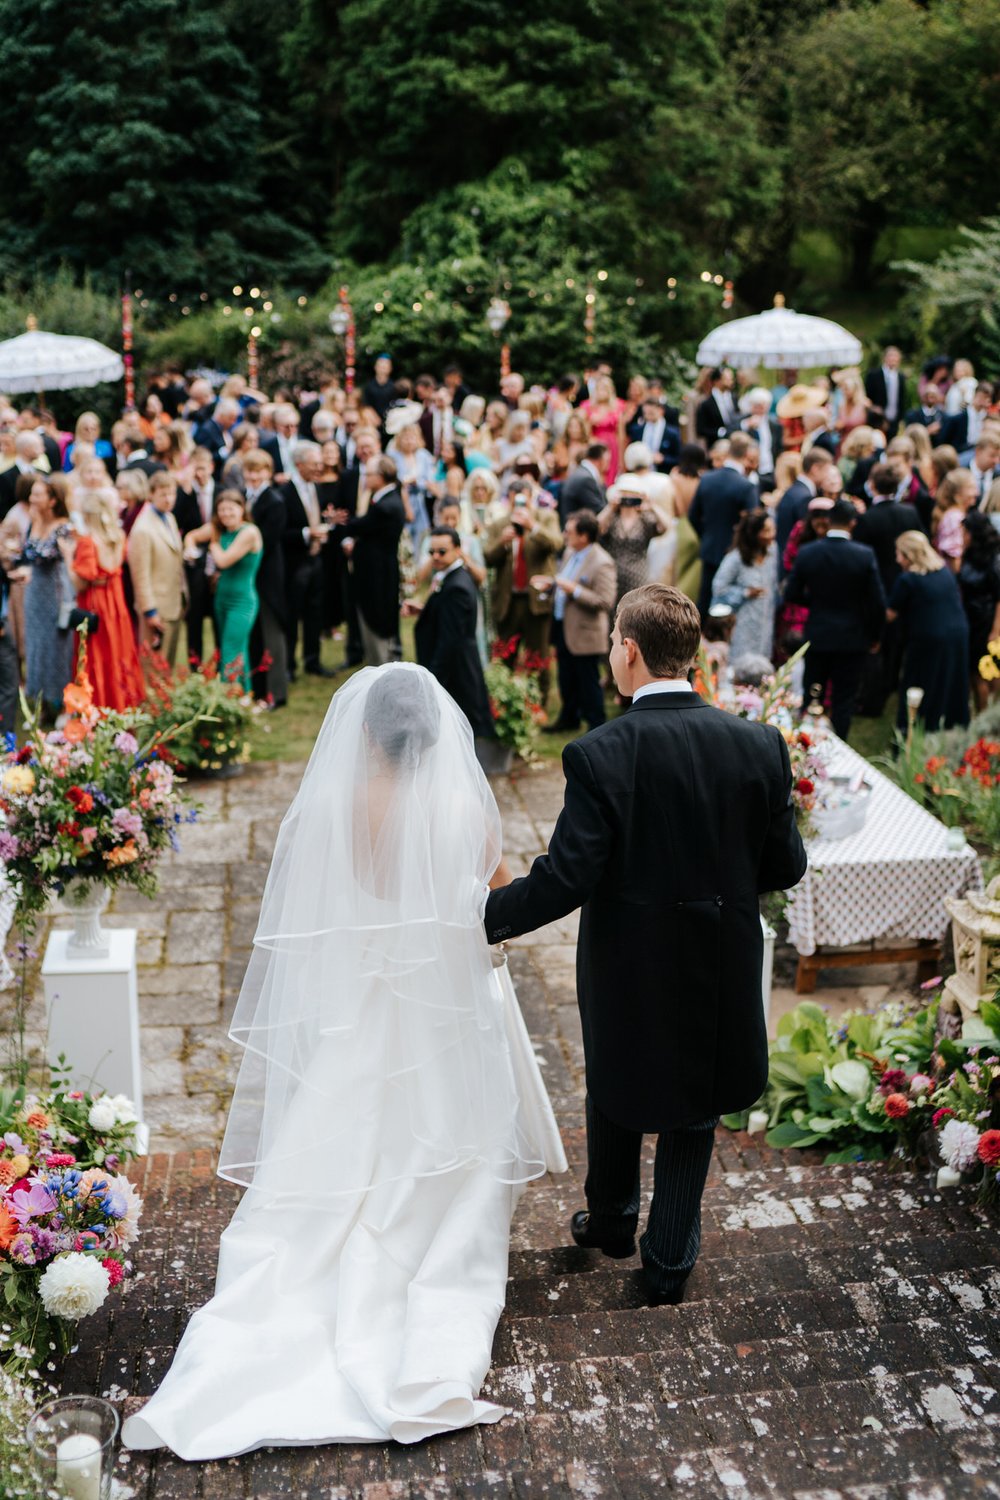 Bride and groom walk down steps and into their wedding reception as guests clap